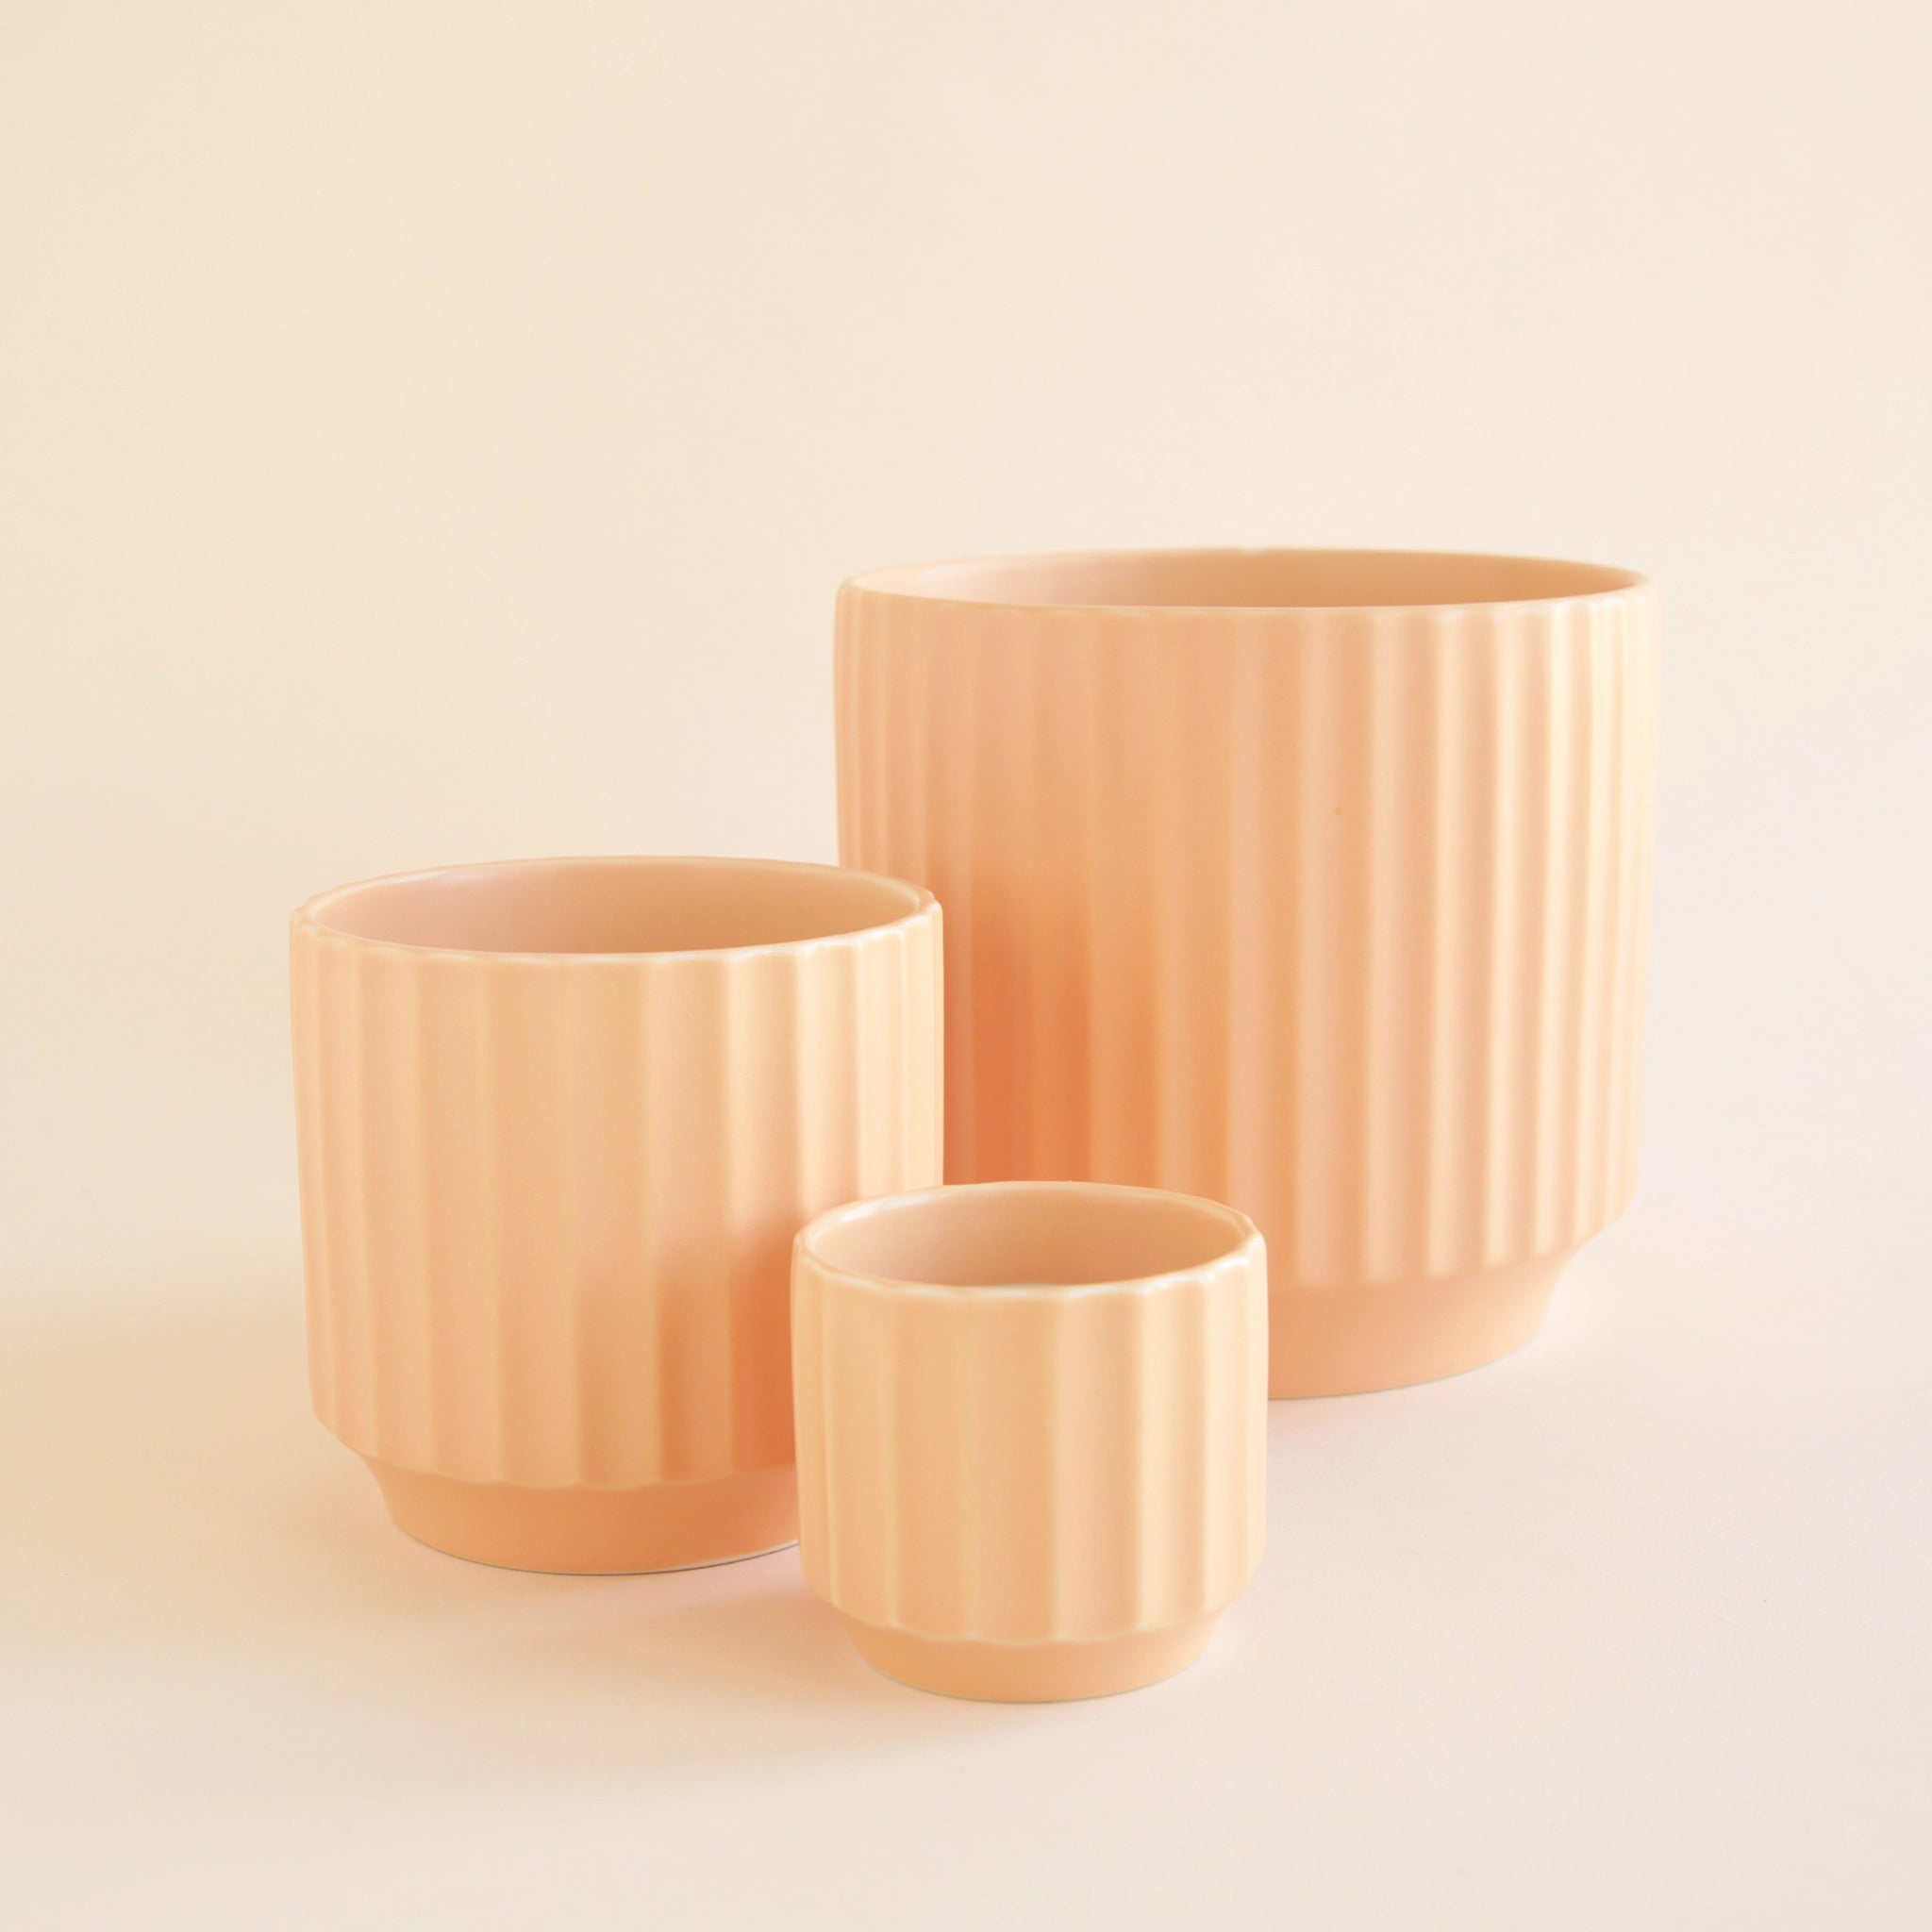 On an ivory background is three different shaped ceramic pots in a warm toned pink shade.